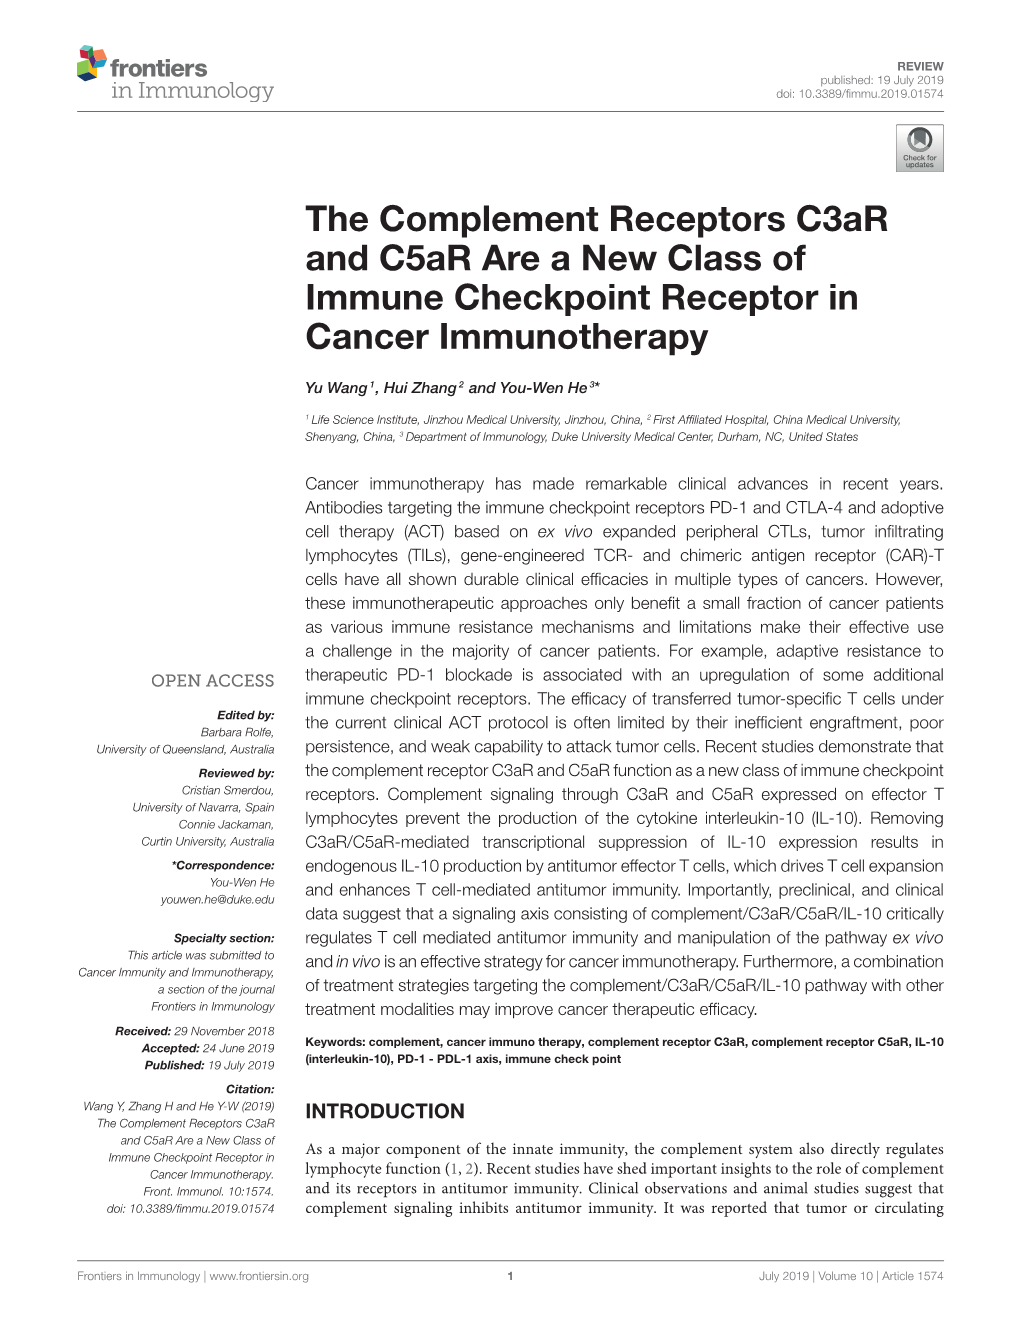 The Complement Receptors C3ar and C5ar Are a New Class of Immune Checkpoint Receptor in Cancer Immunotherapy